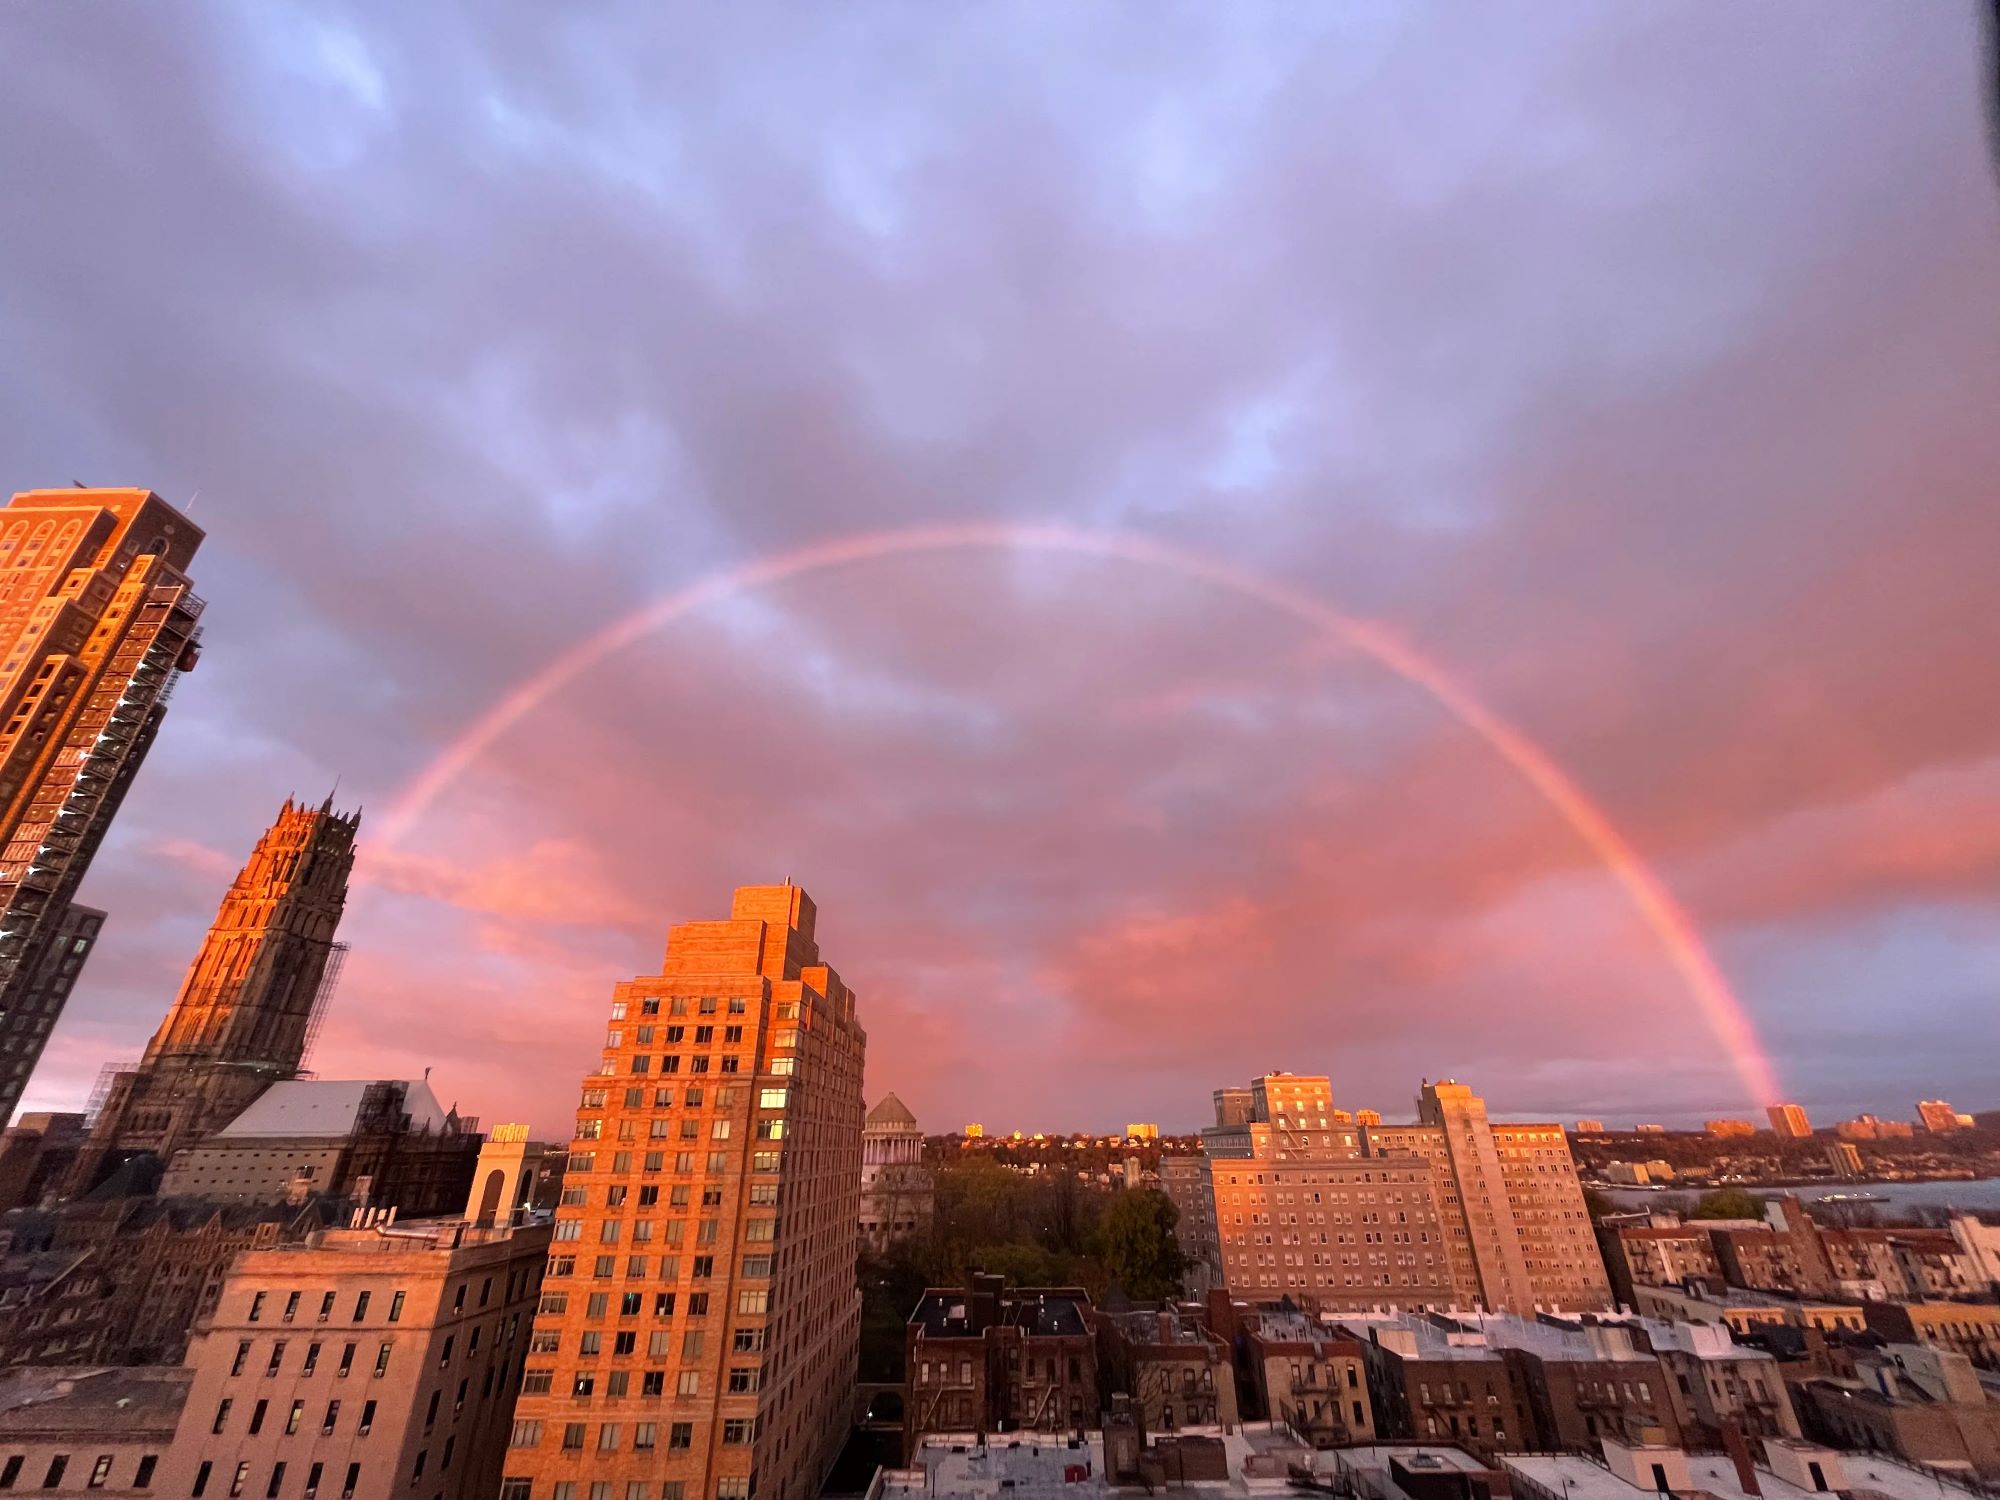 a-double-rainbow-appears-over-new-york-city-on-9-11-anniversary